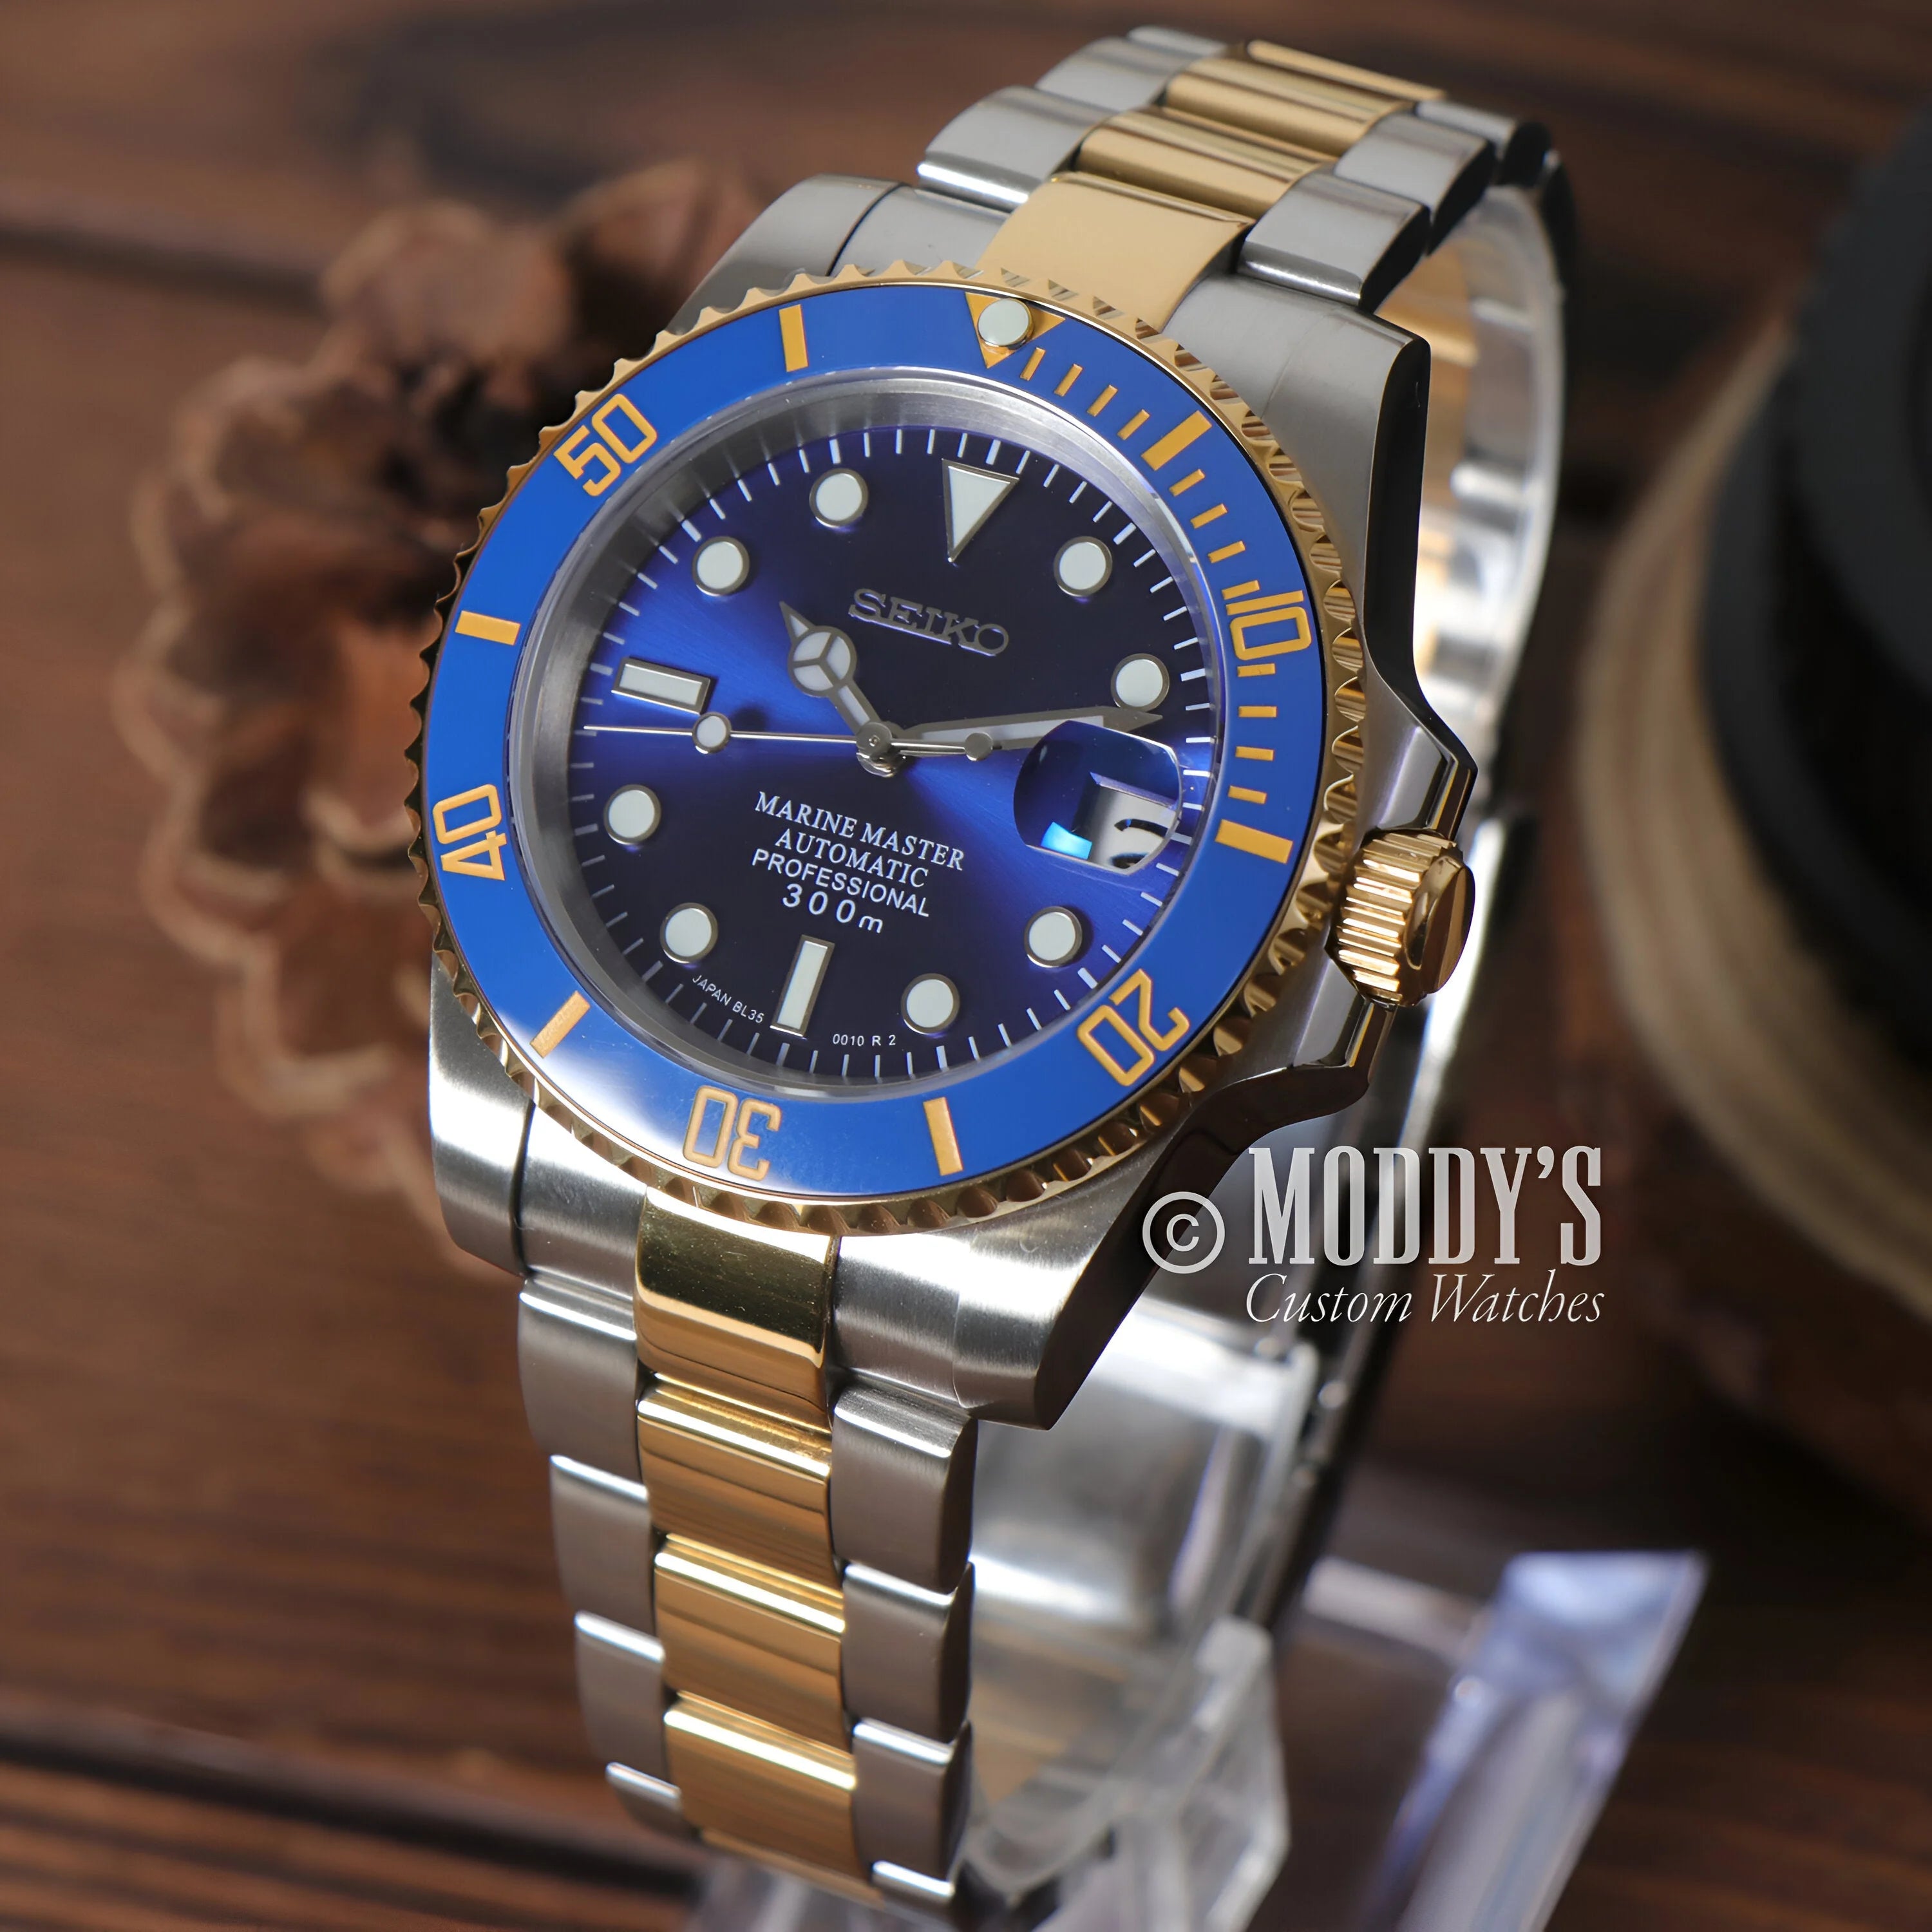 Seiko Marine Master Automatic Dive Watch, Mod Submariner Blue Dial With Two-tone Bracelet